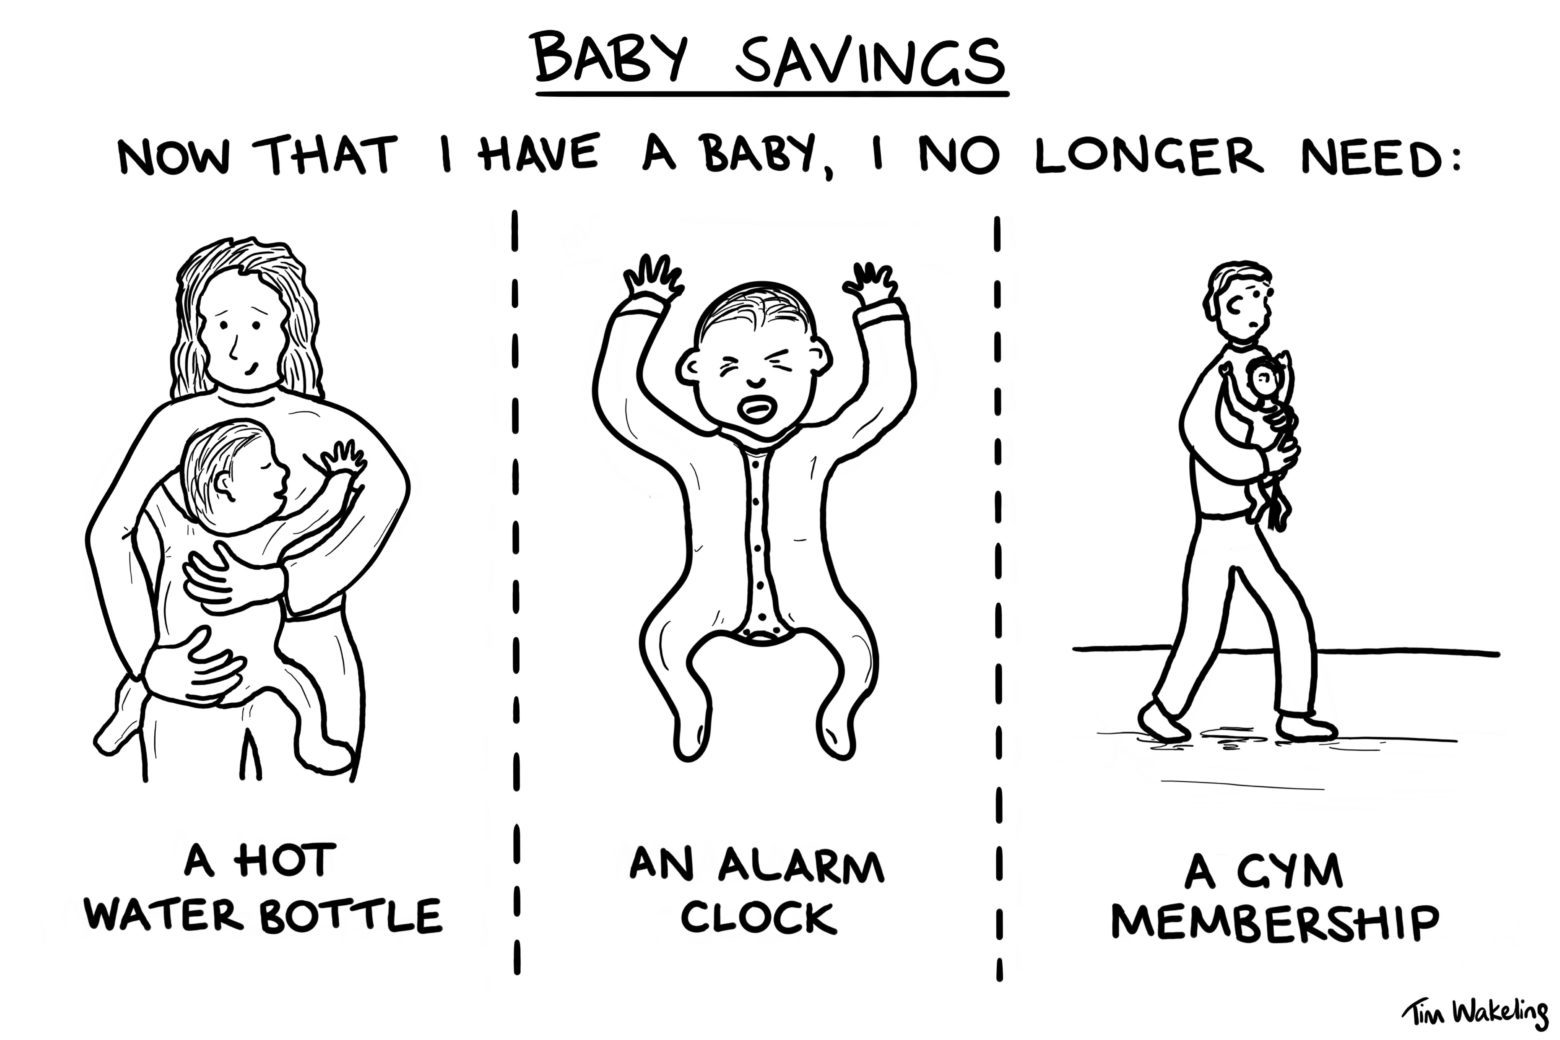 A baby cartoon about things I no longer need now that I have a baby